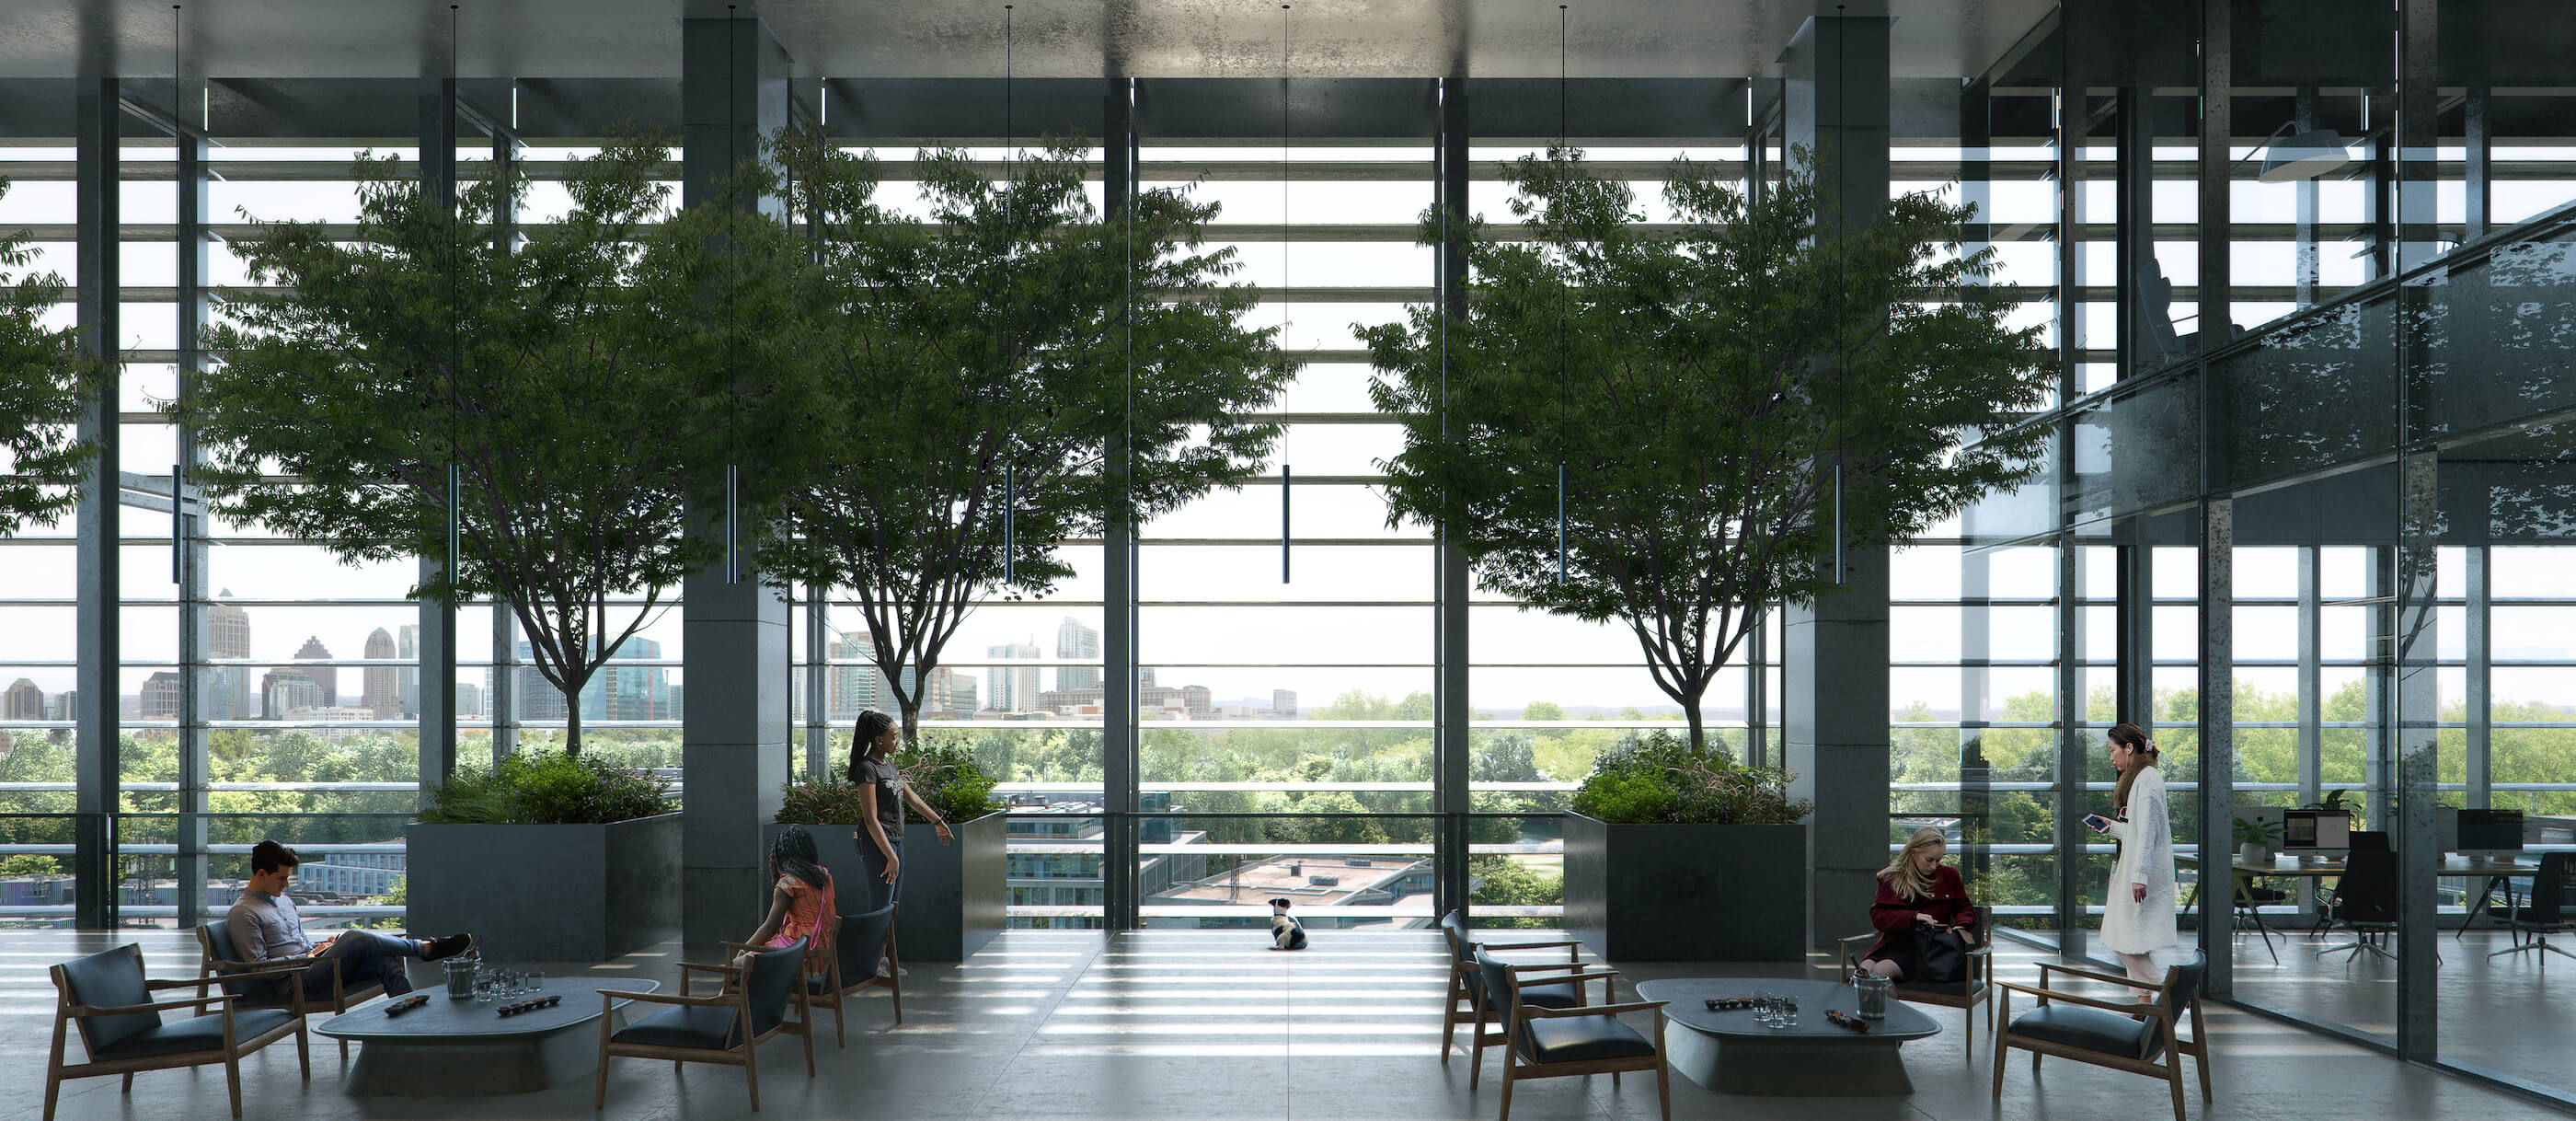 people sit next to a large window flanked by potted trees